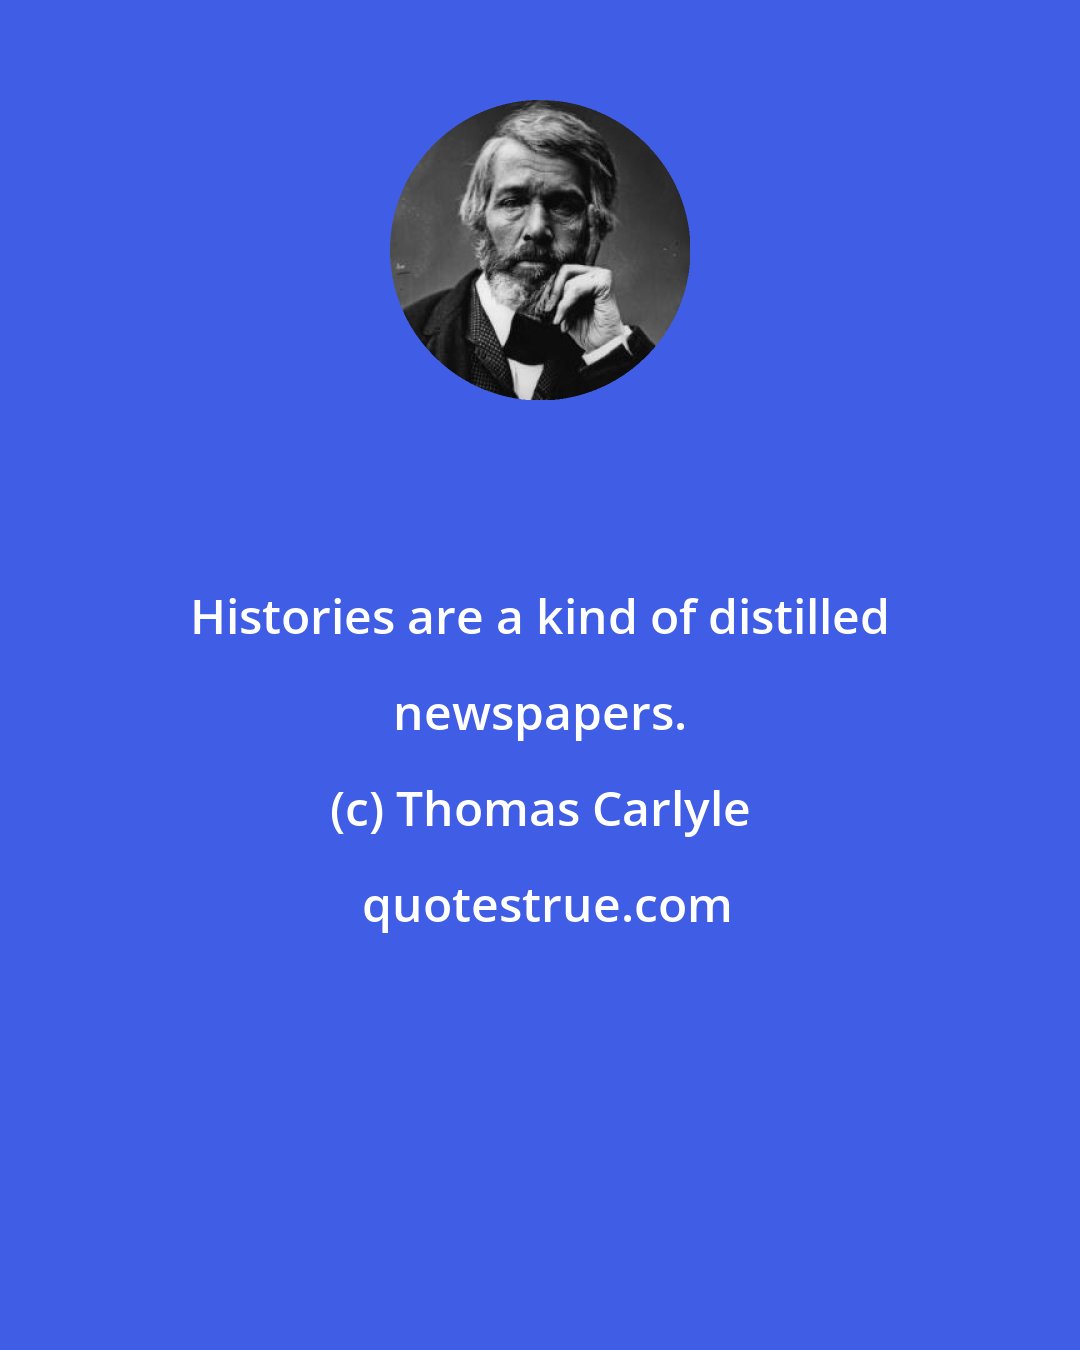 Thomas Carlyle: Histories are a kind of distilled newspapers.